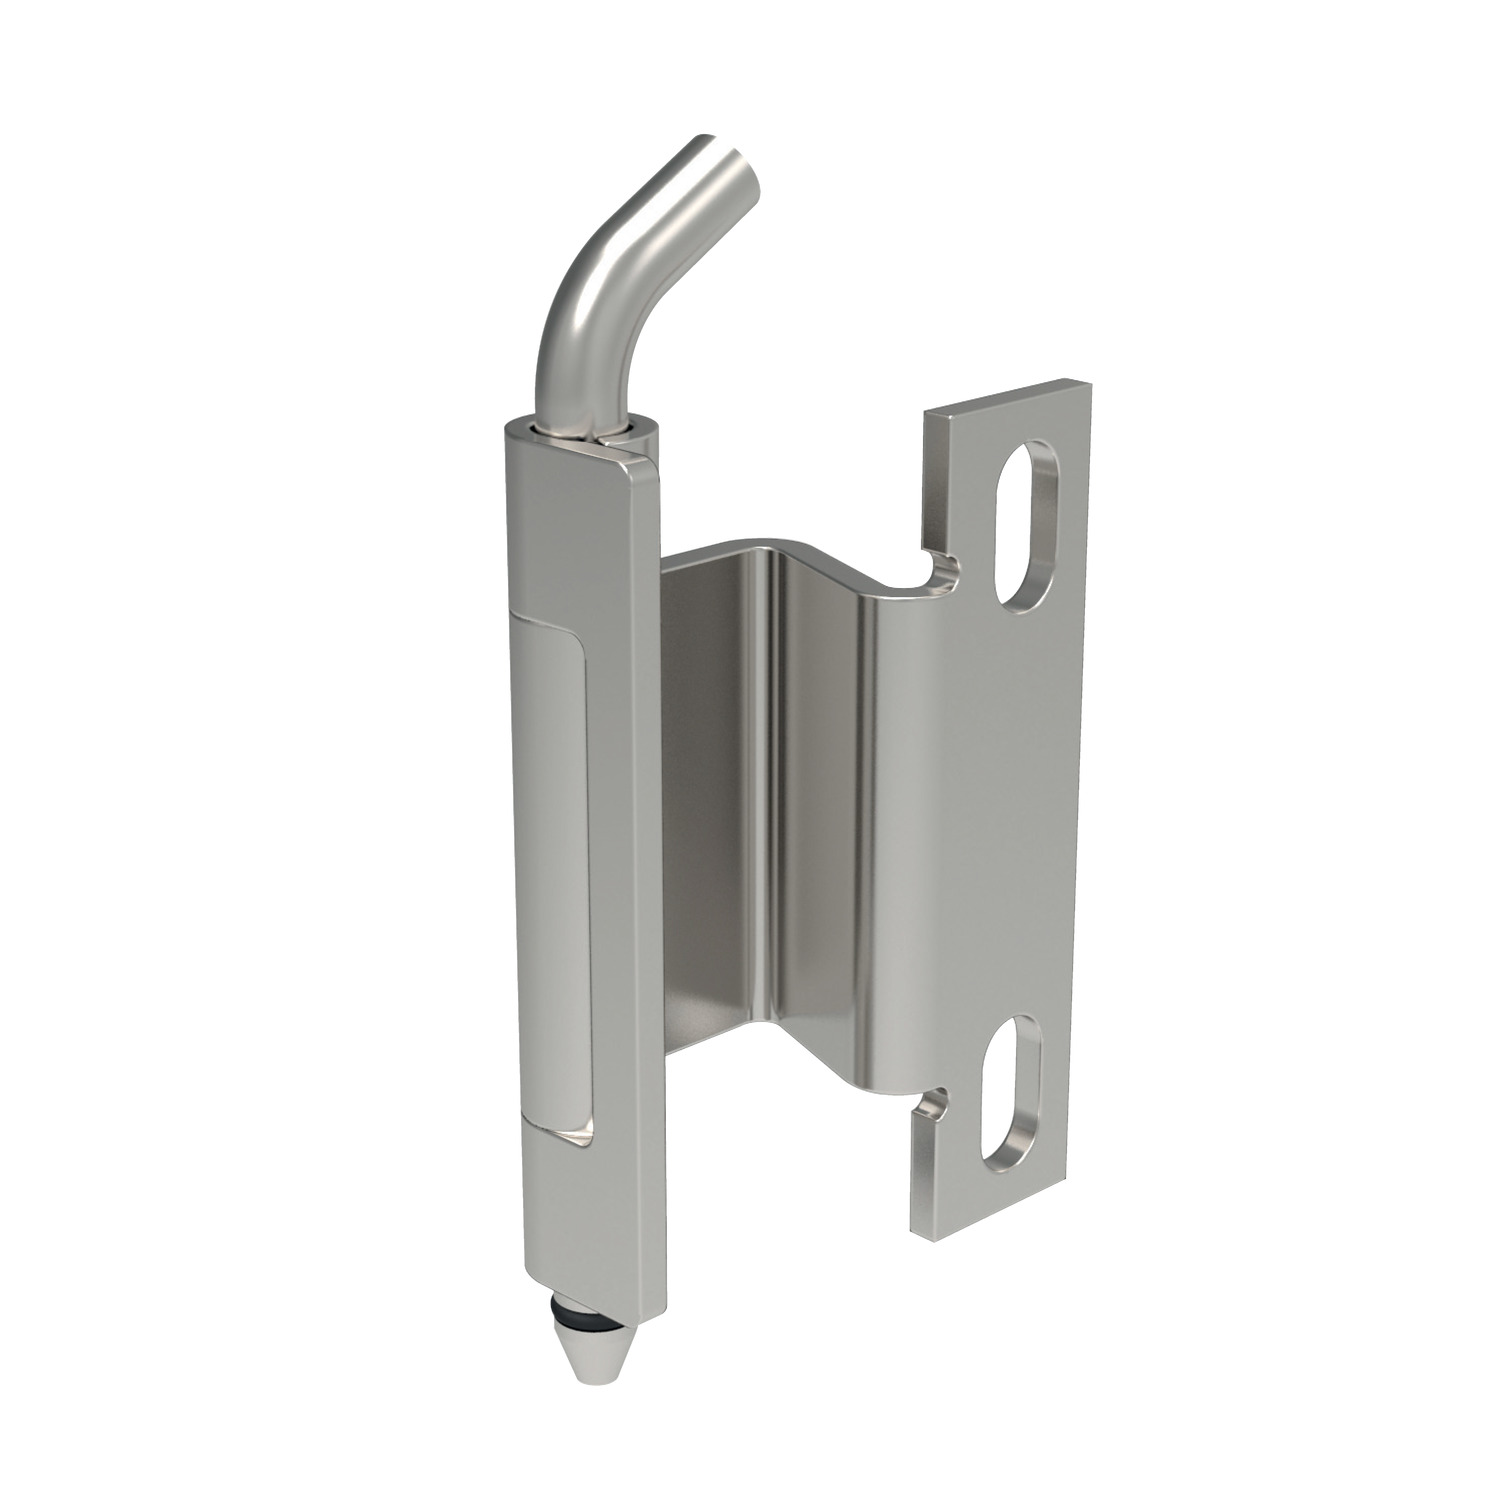 S2121 Concealed Pivot Hinges - Lift Off